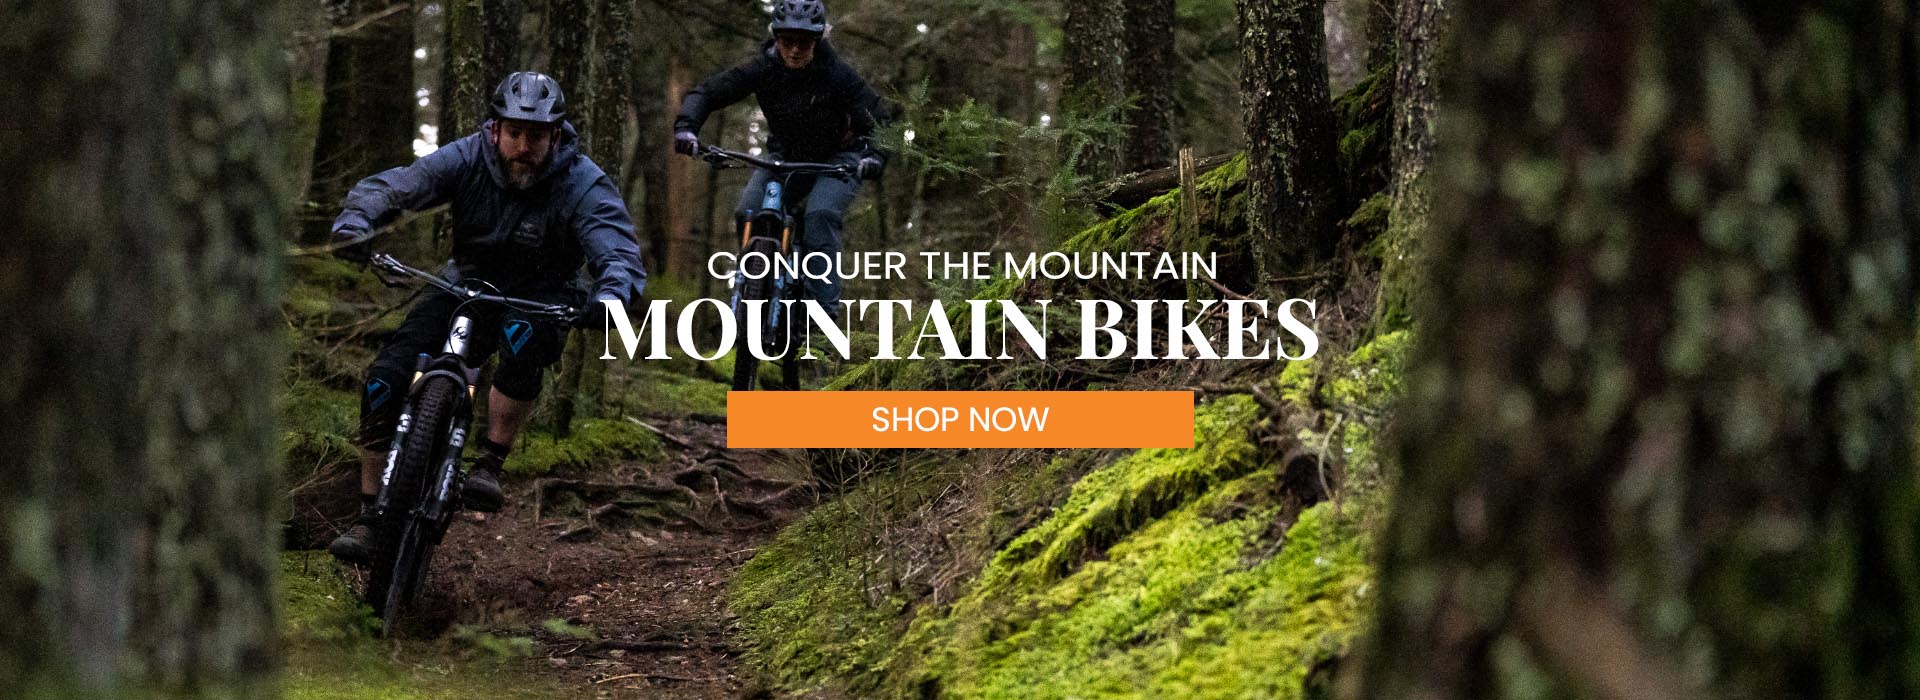 Mountain Bikes have arrived at BlueZone Sports. Shop now!